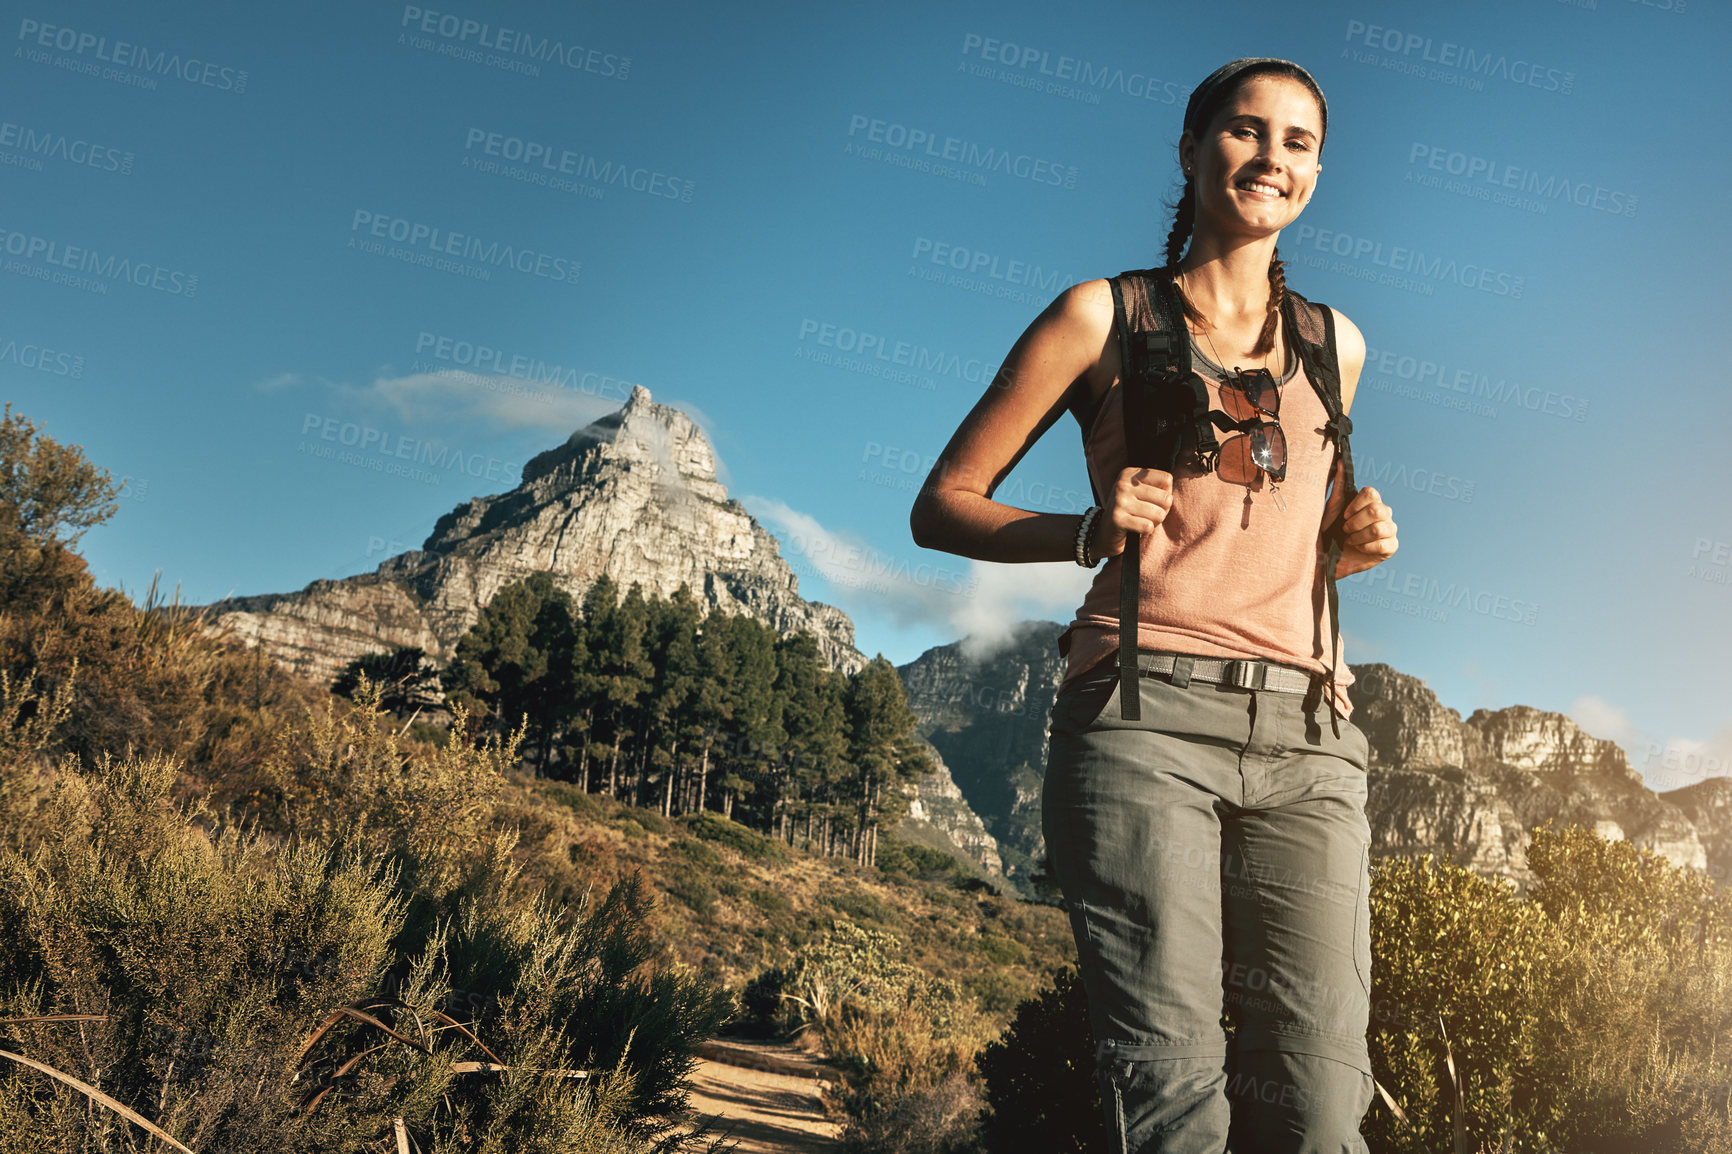 Buy stock photo Portrait of a young woman out on a hike through the mountains